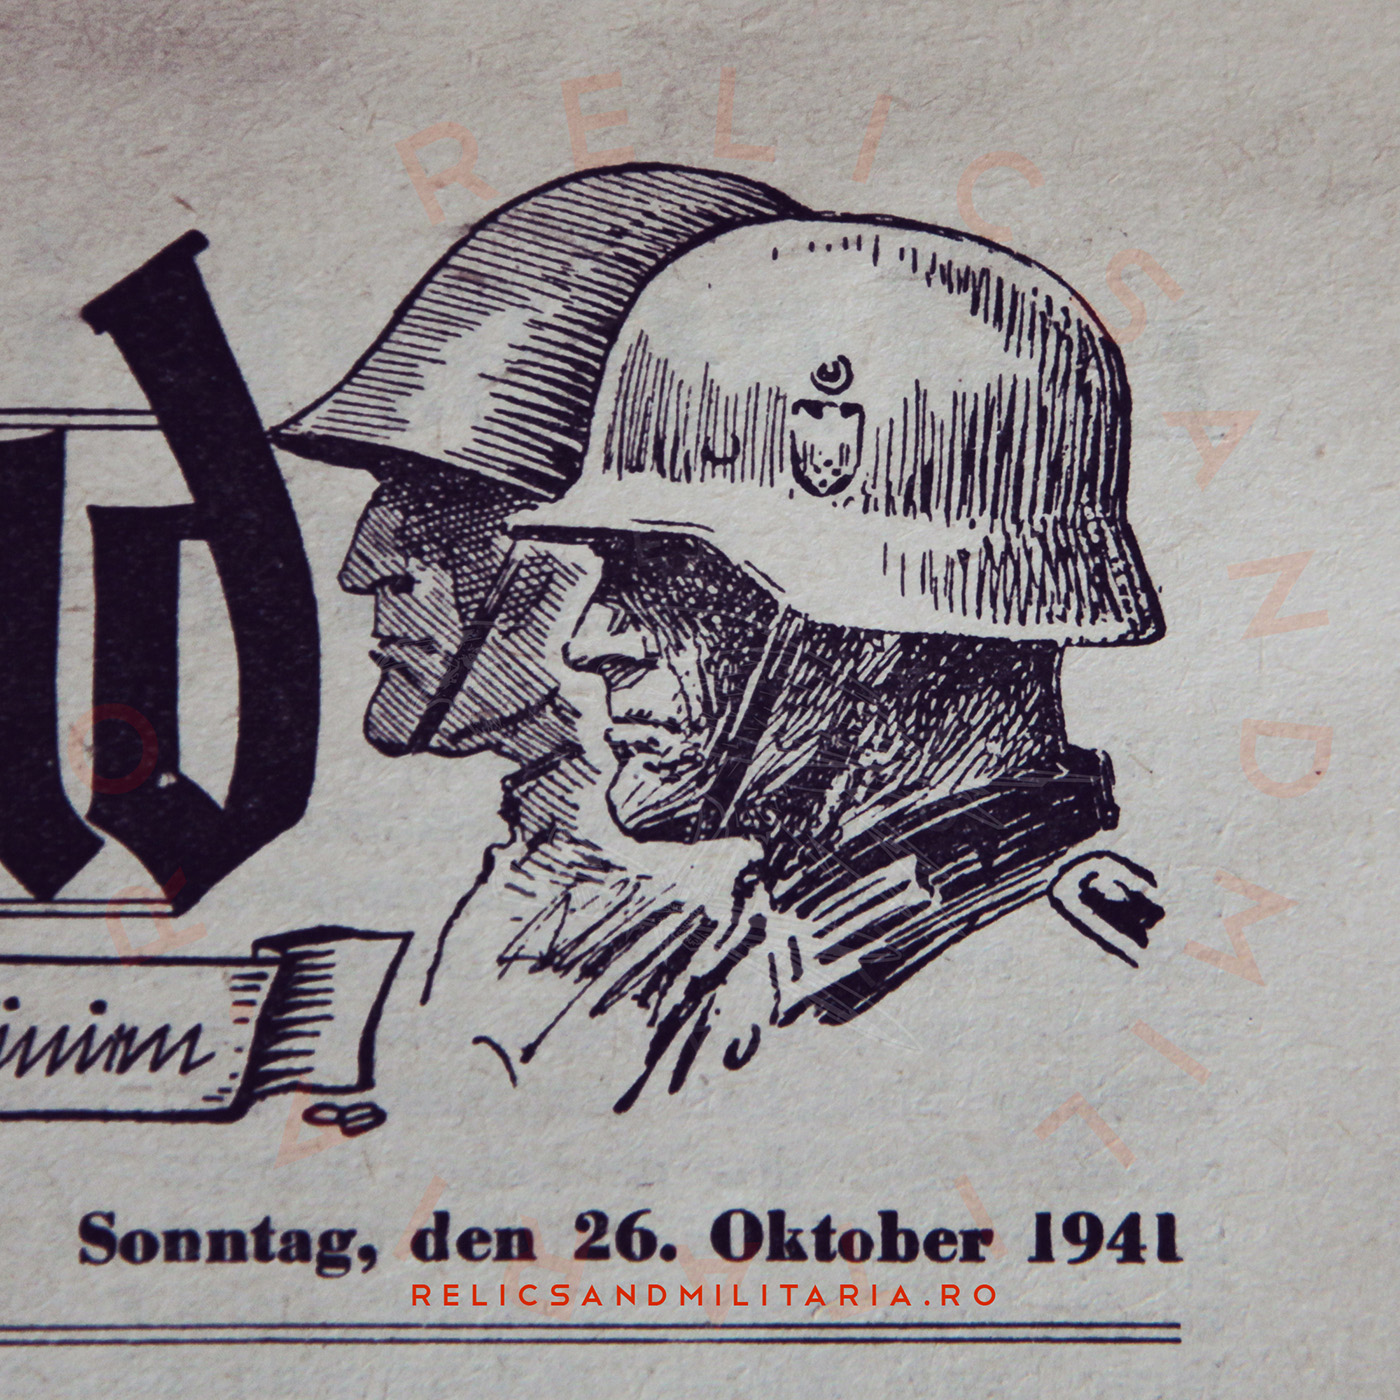 The German comrade. Soldier's newspaper of the German Army mission in Romania